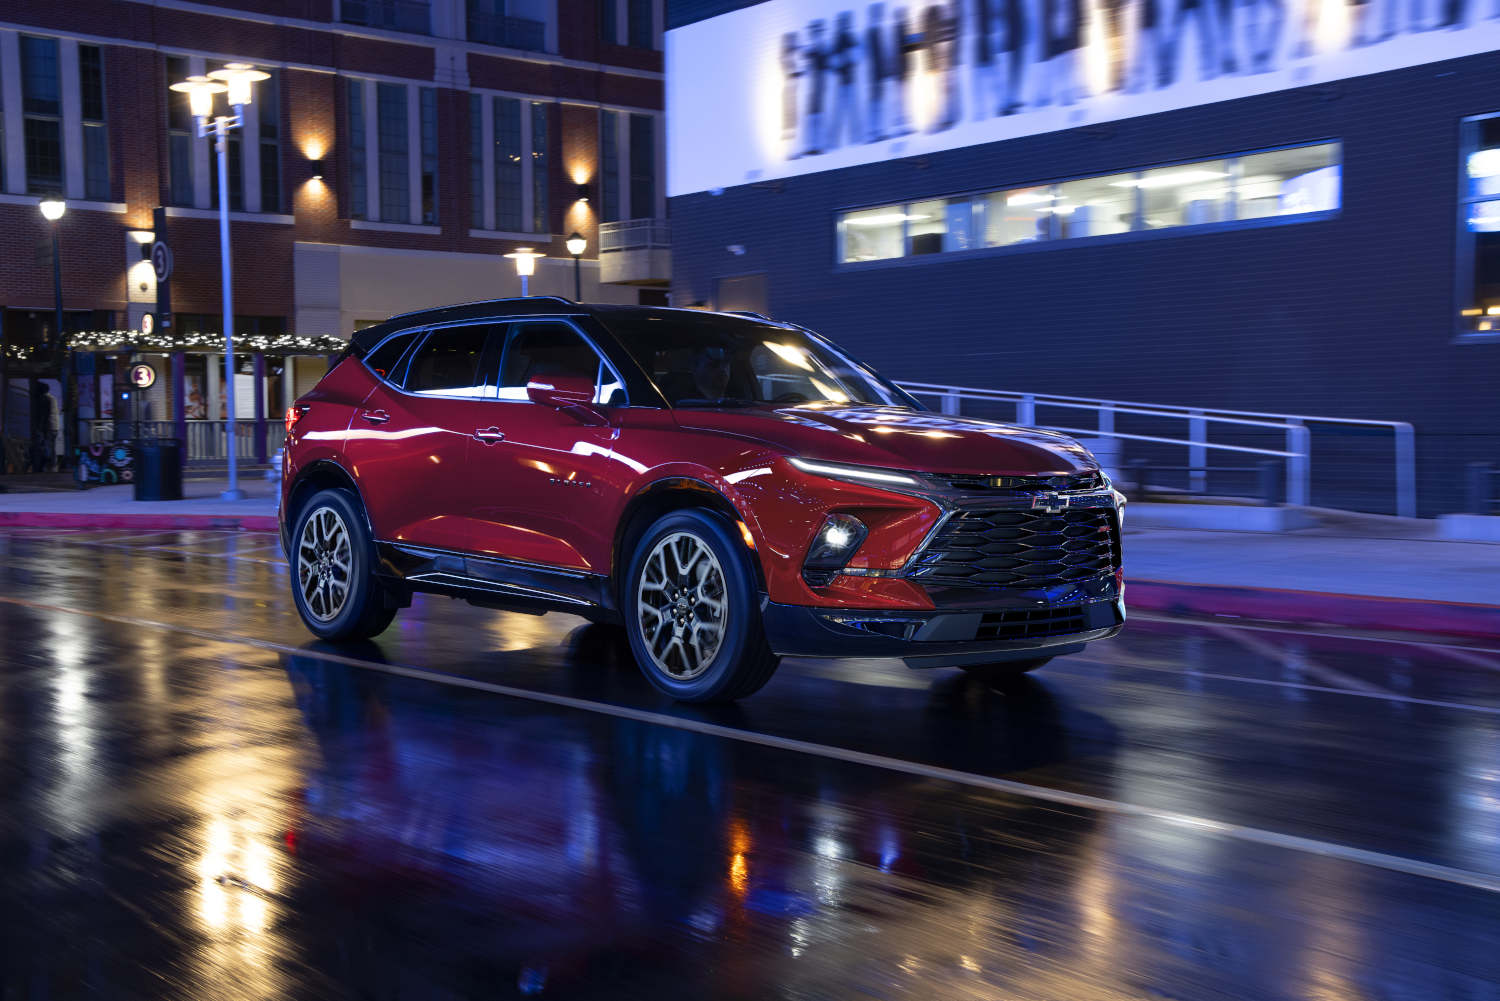 This midsize SUV is the 2023 Chevy Blazer